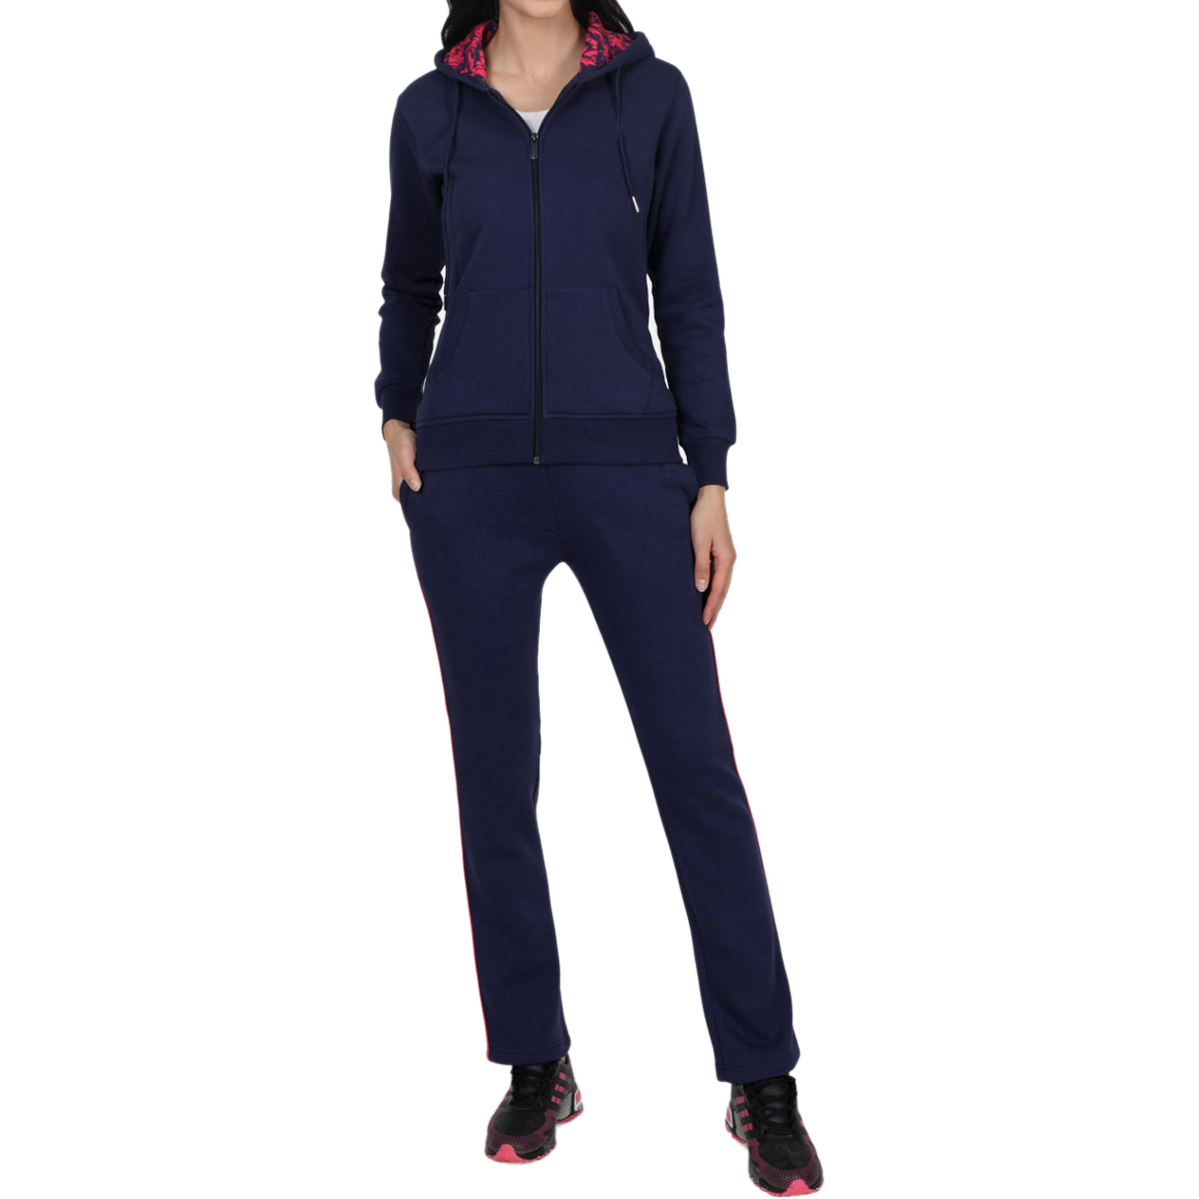 Navy Hooded Tracksuits Women